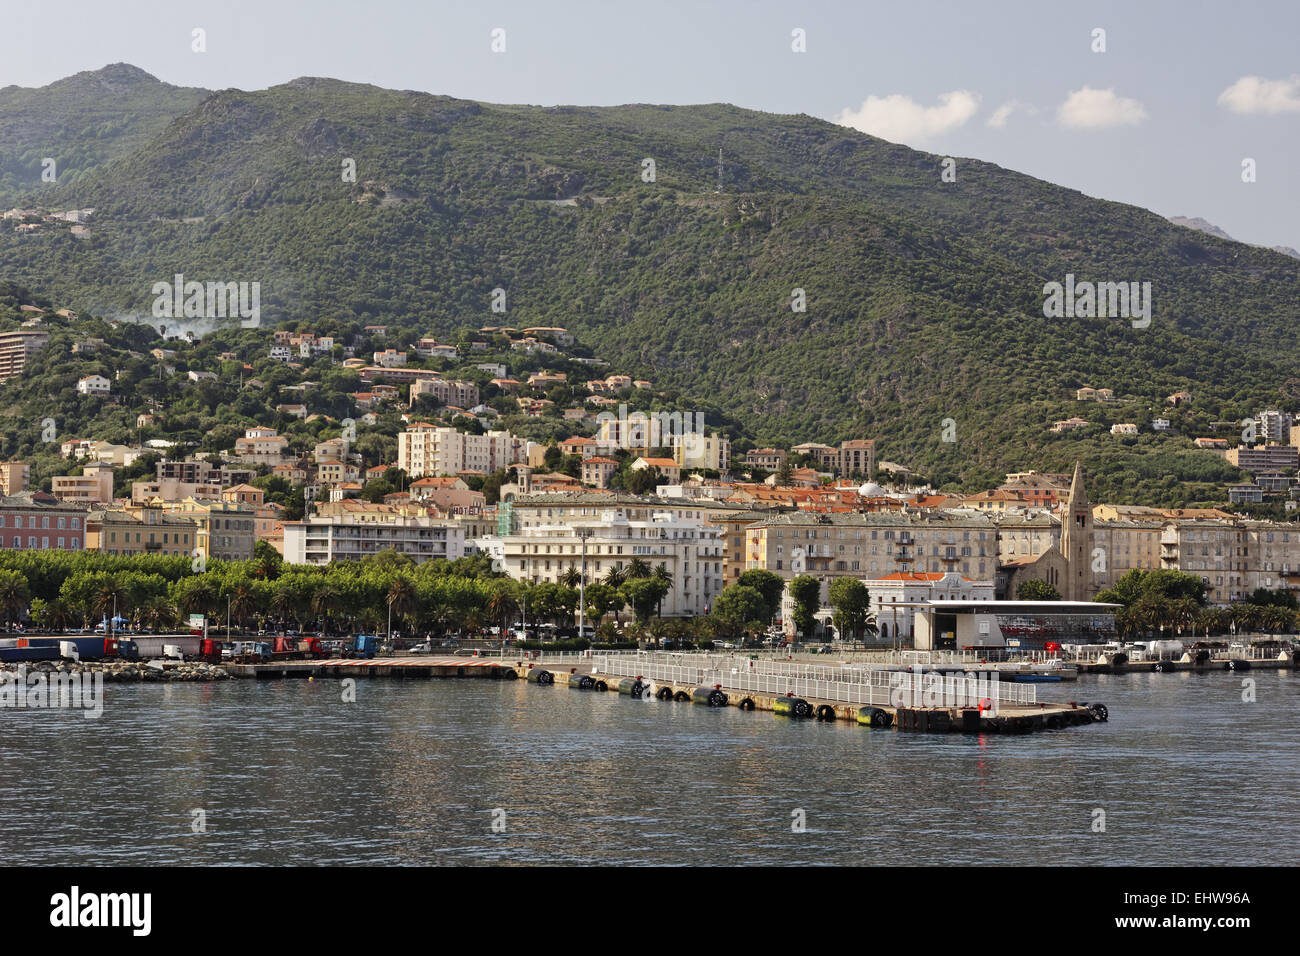 Bastia, view from the ferry, Corsica, France Stock Photo